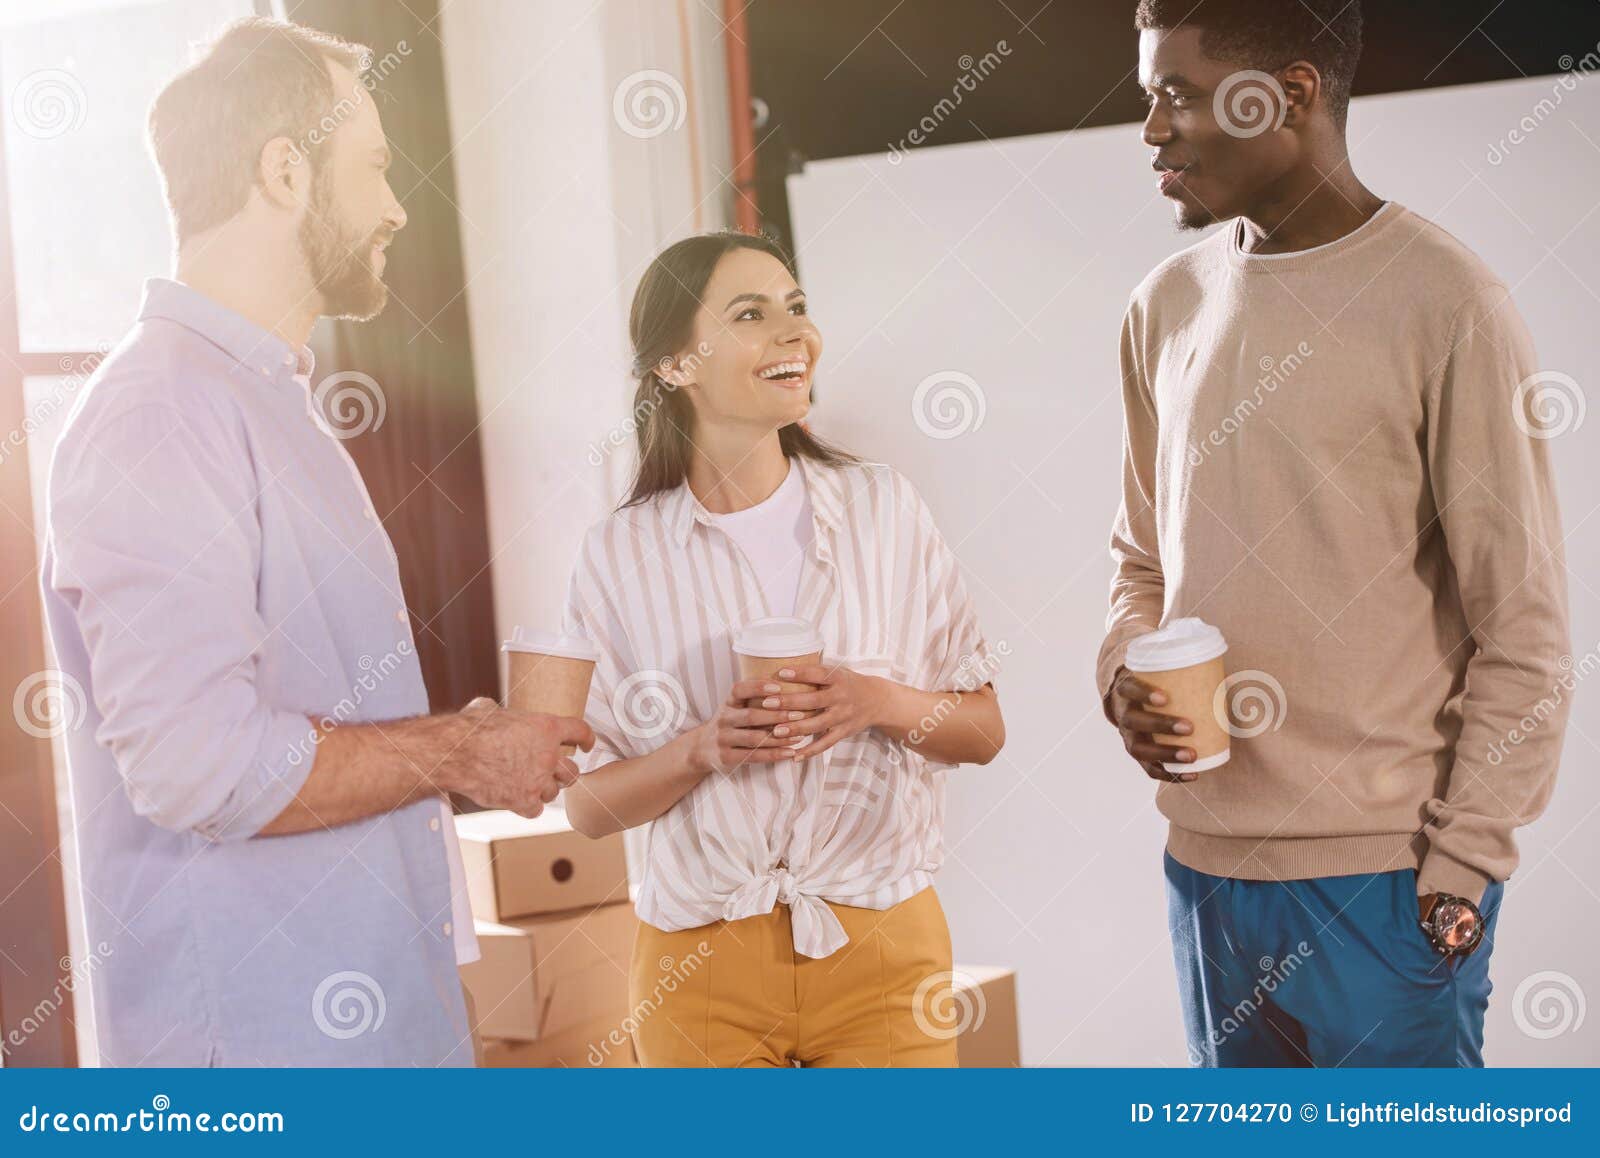 happy multiethnic coworkers holding paper cups and talking in new office